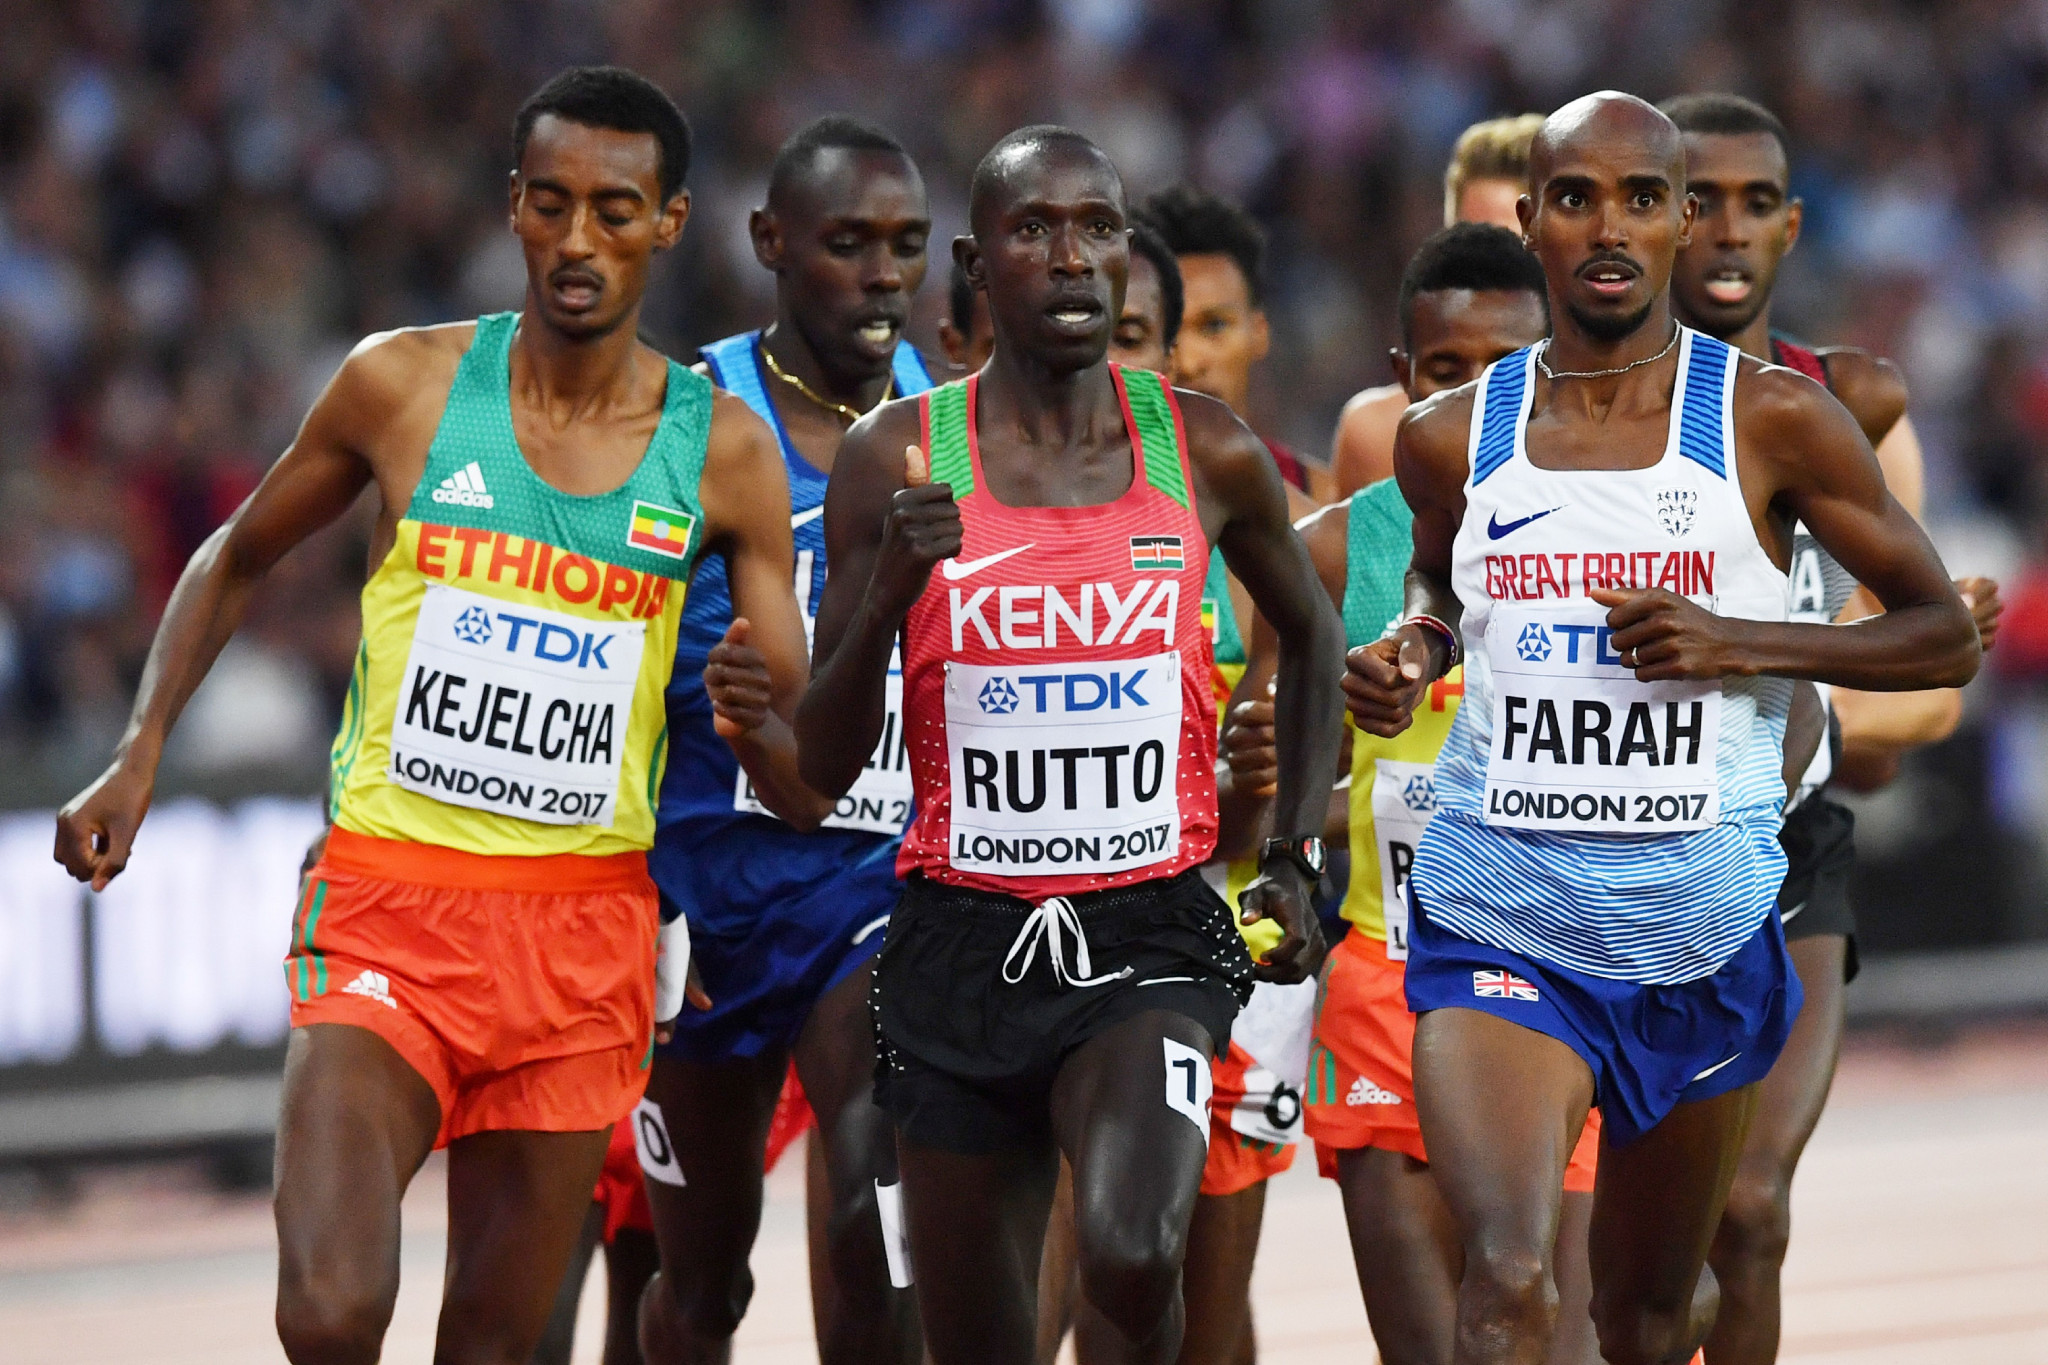 Rutto becomes latest Kenyan runner to be suspended in doping case